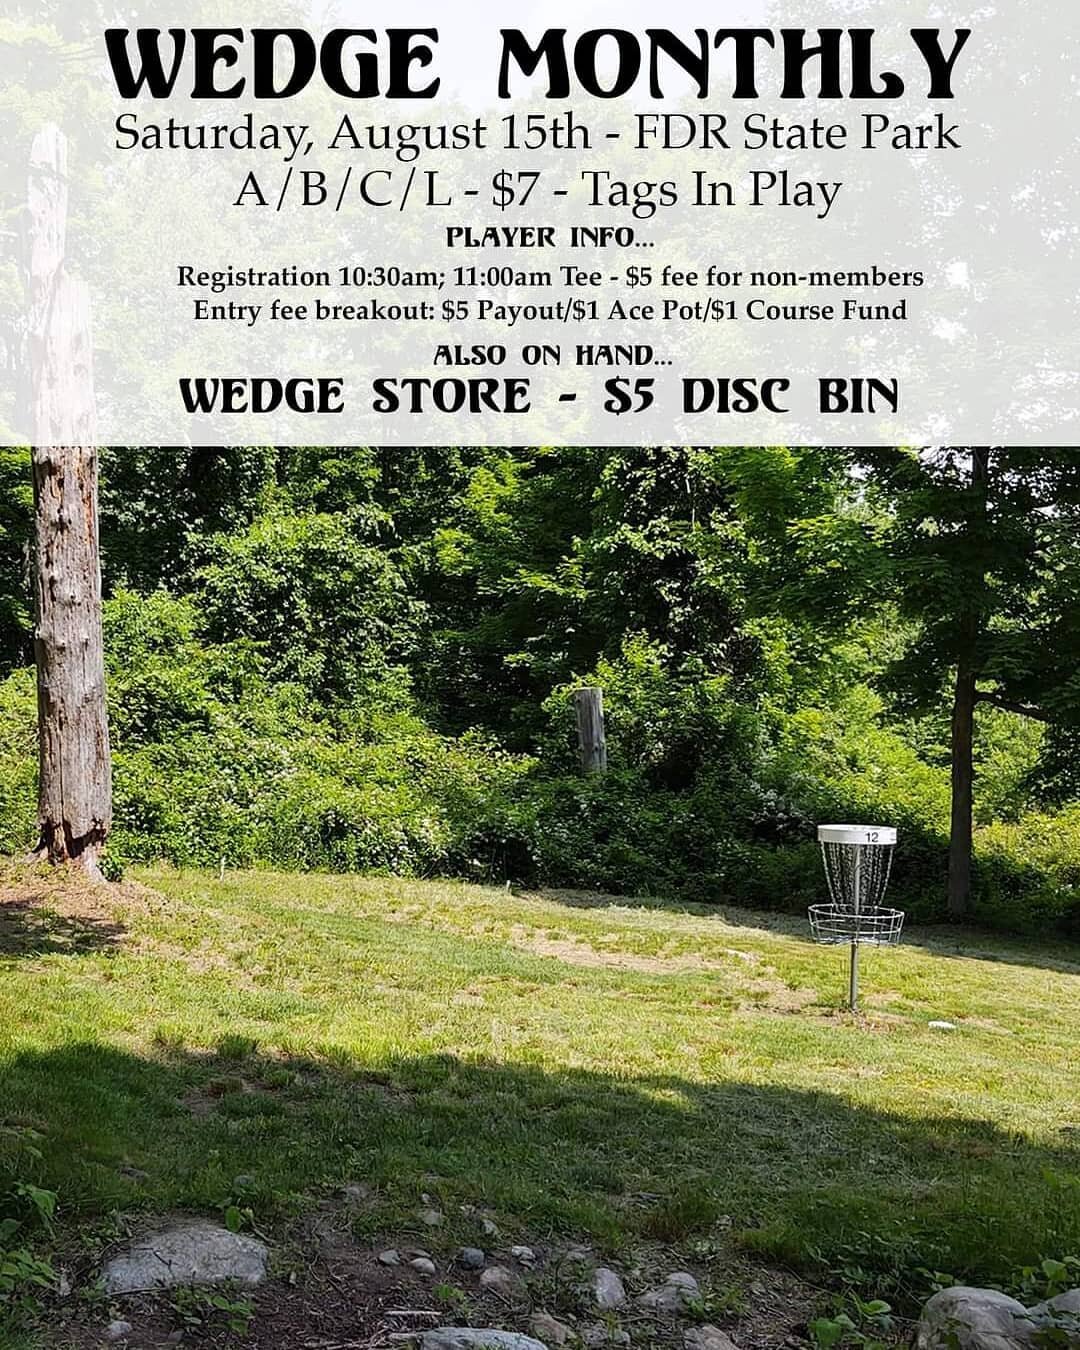 Come join us!!

#discgolfshoutouts #dynamicdiscs #discgolf4women #discgolfgirls #discgolfing #discgolfbaskets #discgolflife #discgolfcourse #discgolfstuff #disccraftdiscs  #frisbeegolf #discmania #growthesportdg #growthesport #pdga #womensdiscgolf  #